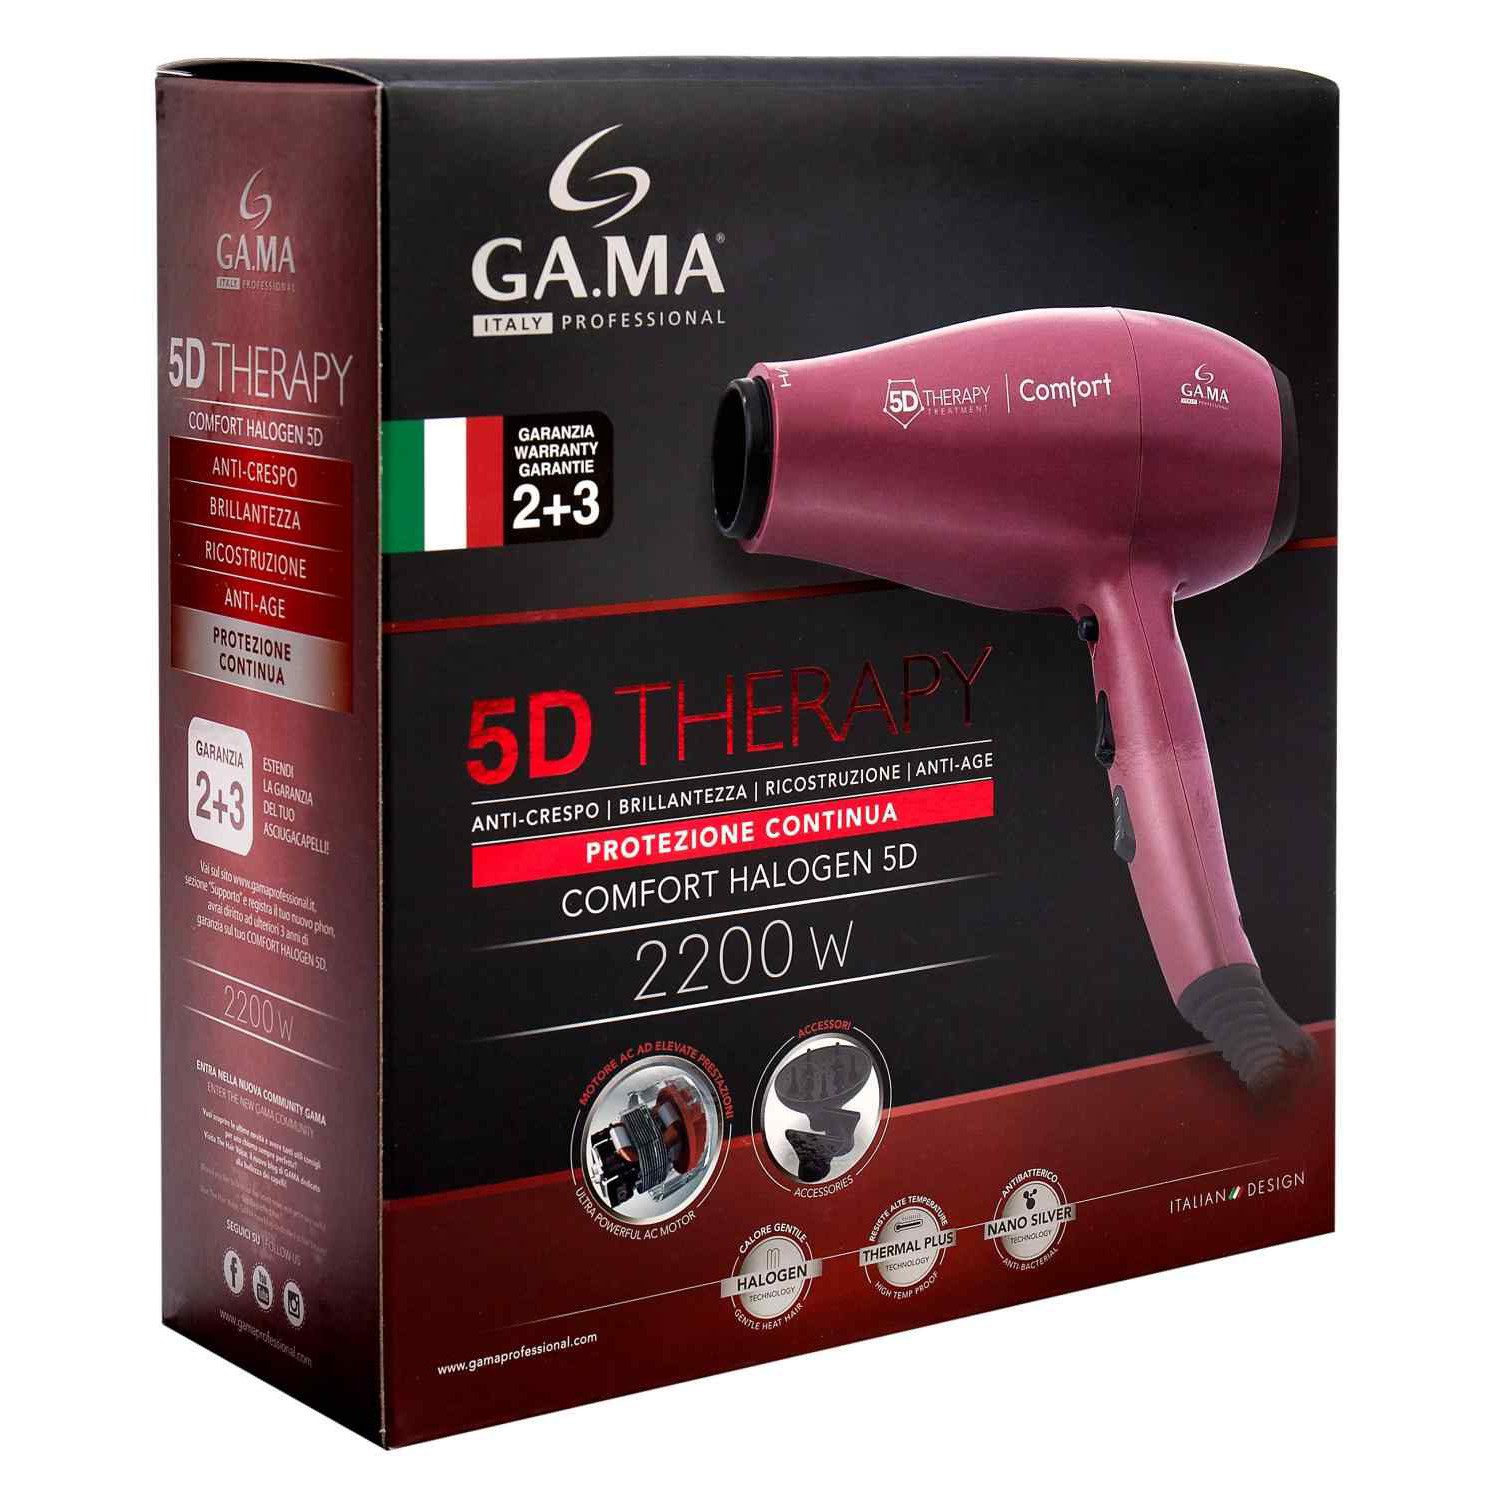 Фен Ga.Ma Comfort Halogen 5D Therapy (GH 0501)